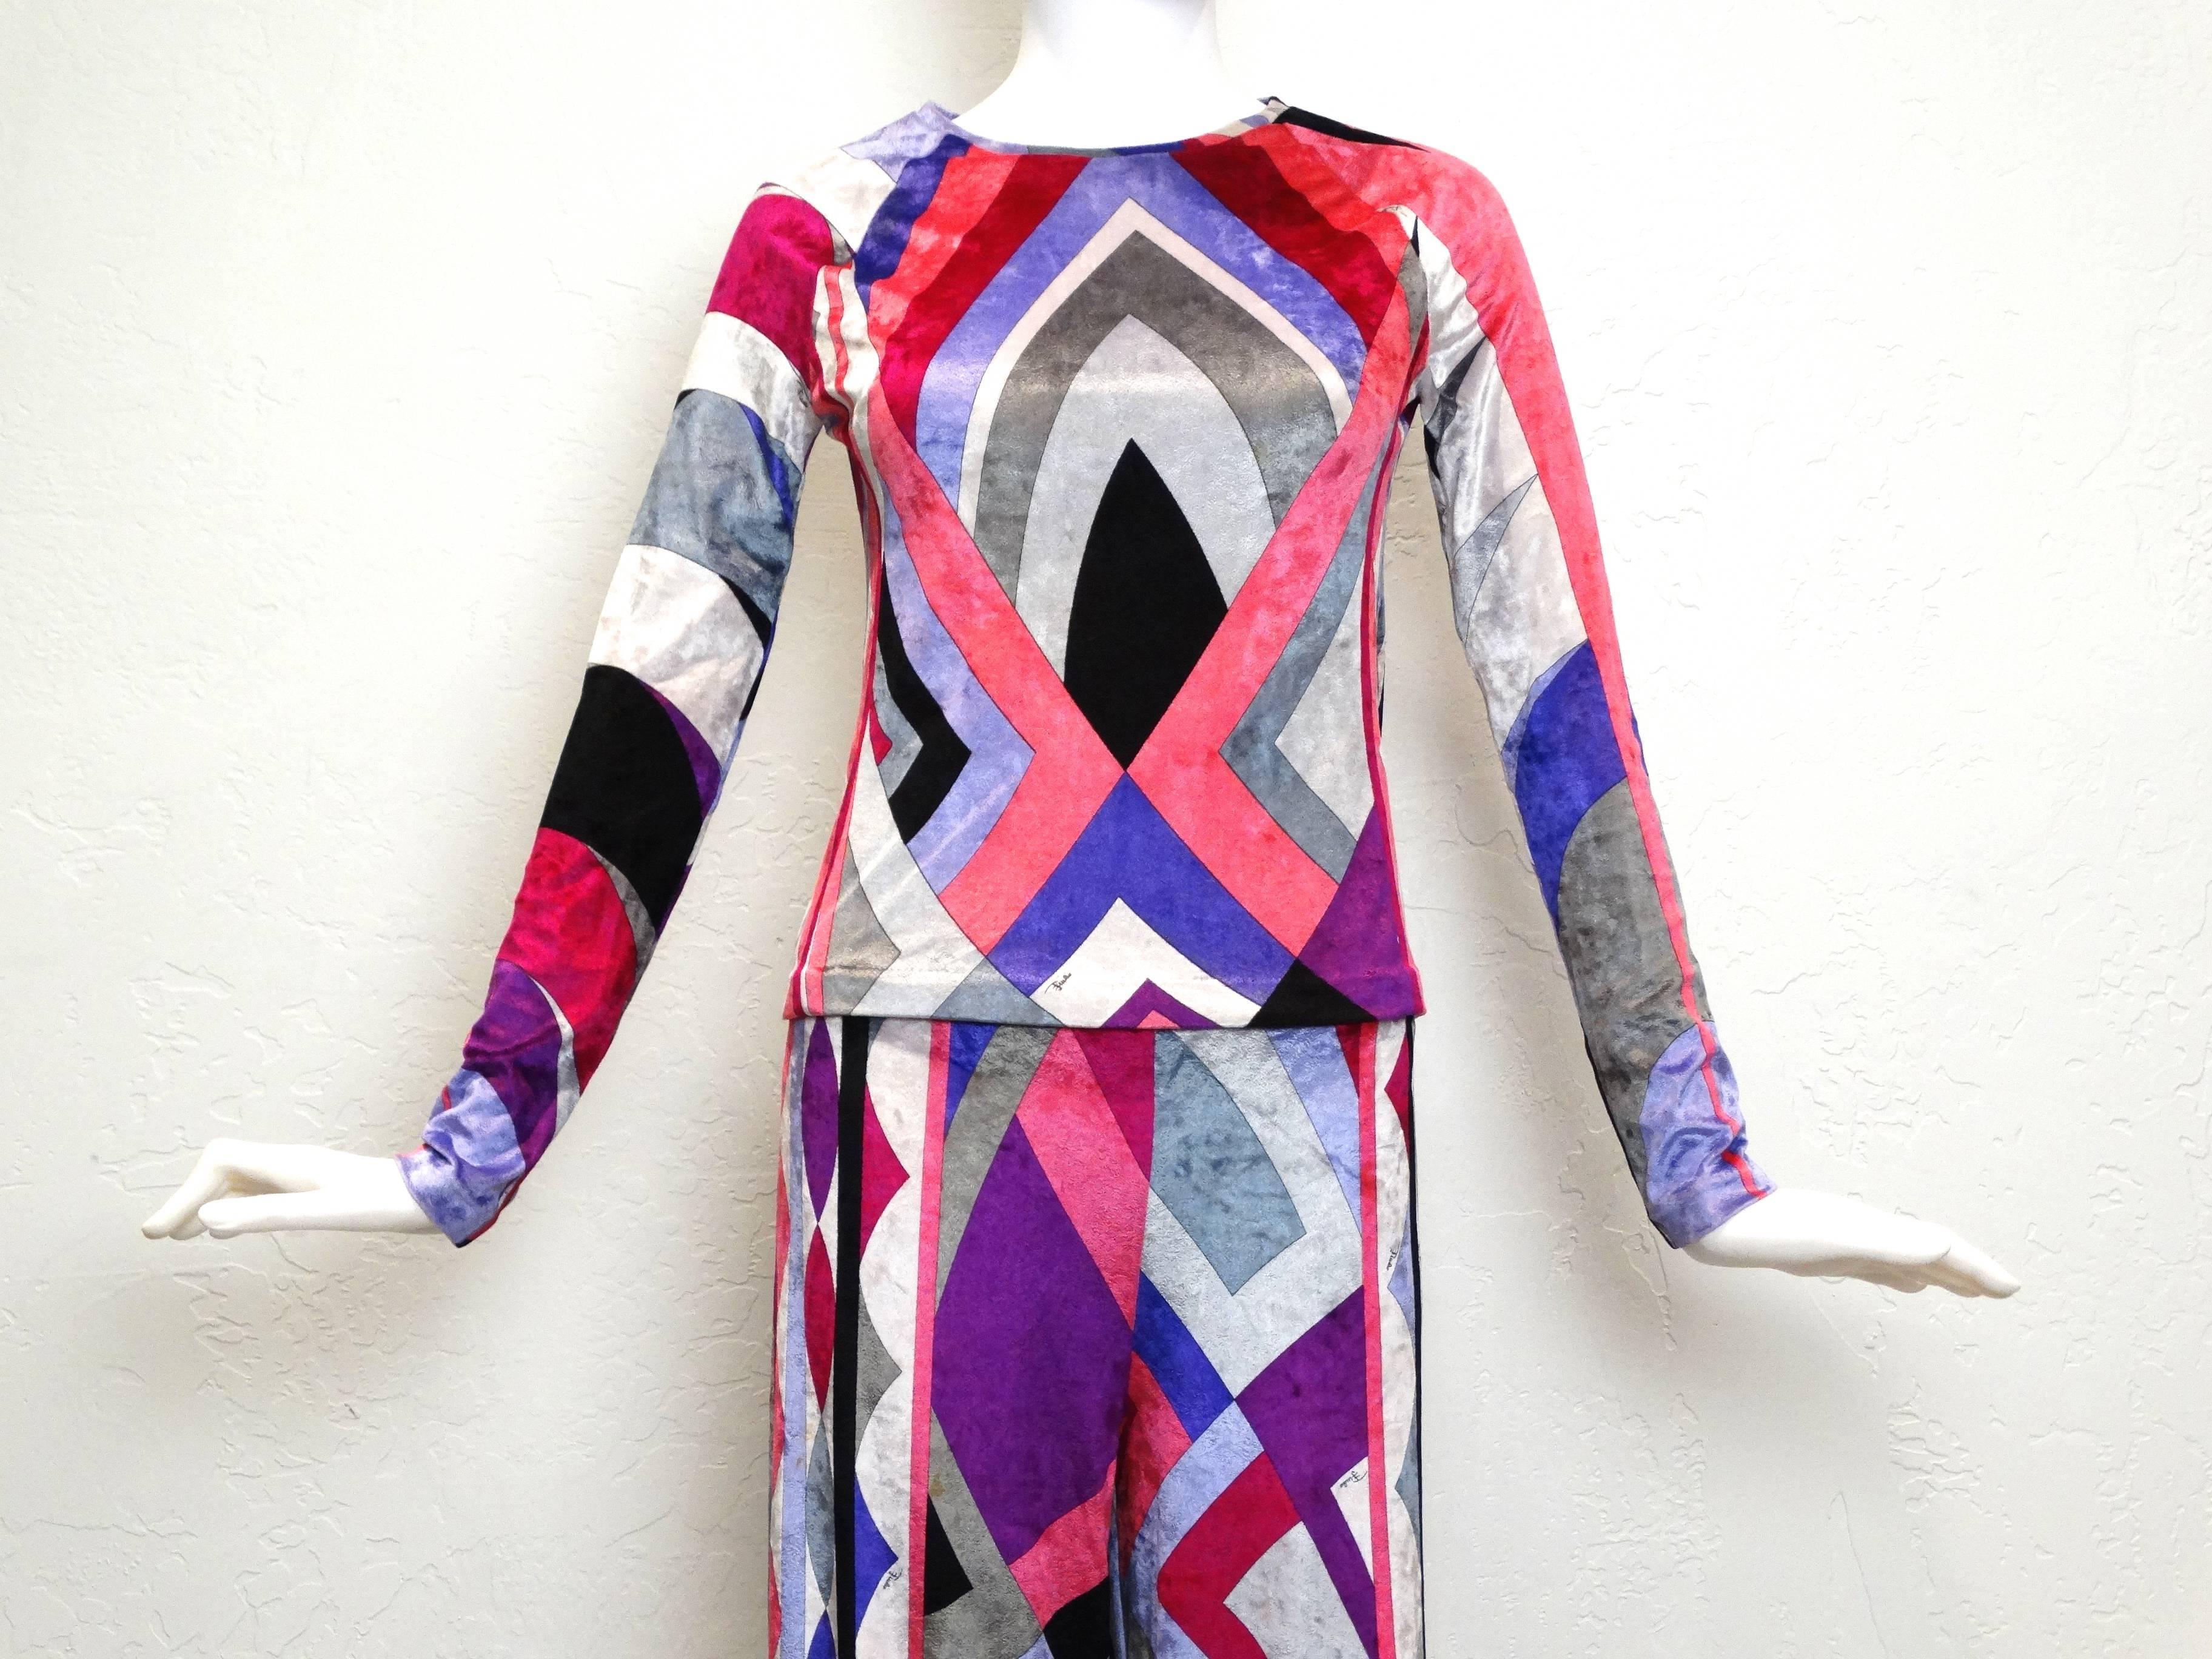 Late 1990's Emilio Pucci Firenze velveteen 2 piece top and pant suit, colorful abstract print in purples, pinks, white, black and grey. Could be worn together or separately. If you would like additional images please request.